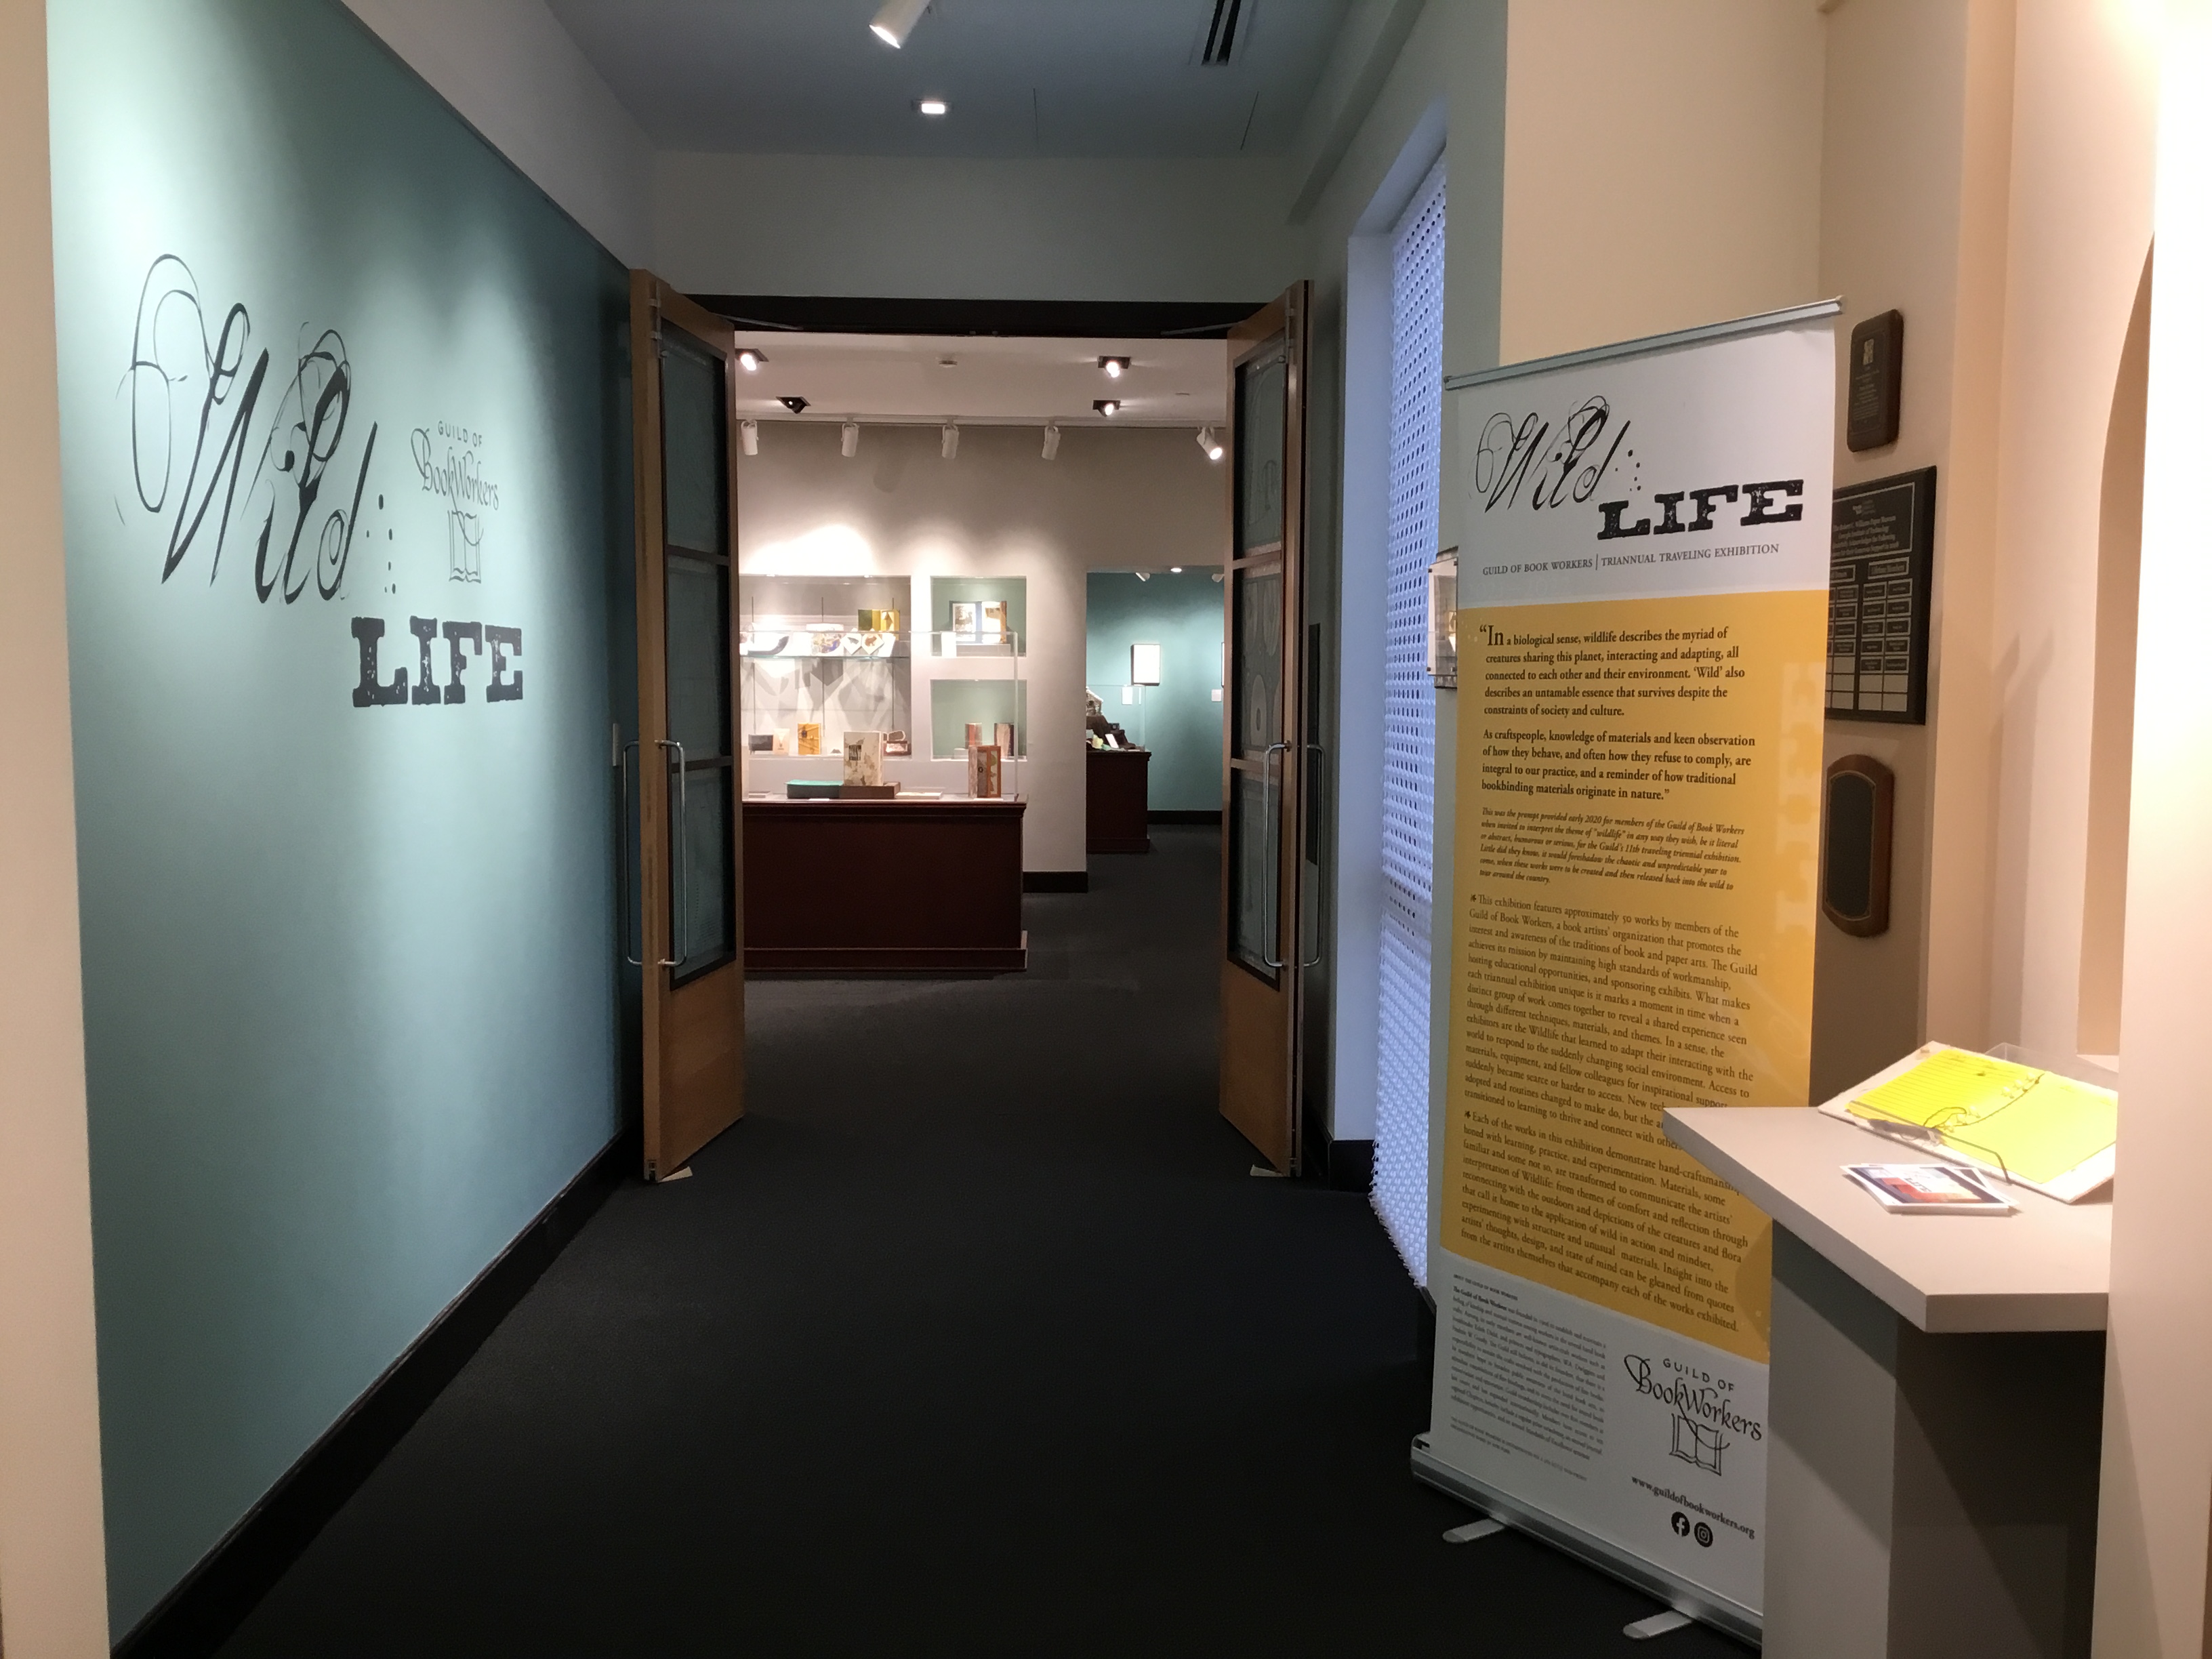 Photo of the gallery entrance with a teal title wall on the left, limited view of cases inside the gallery, and a portable banner on the right side of the hallway